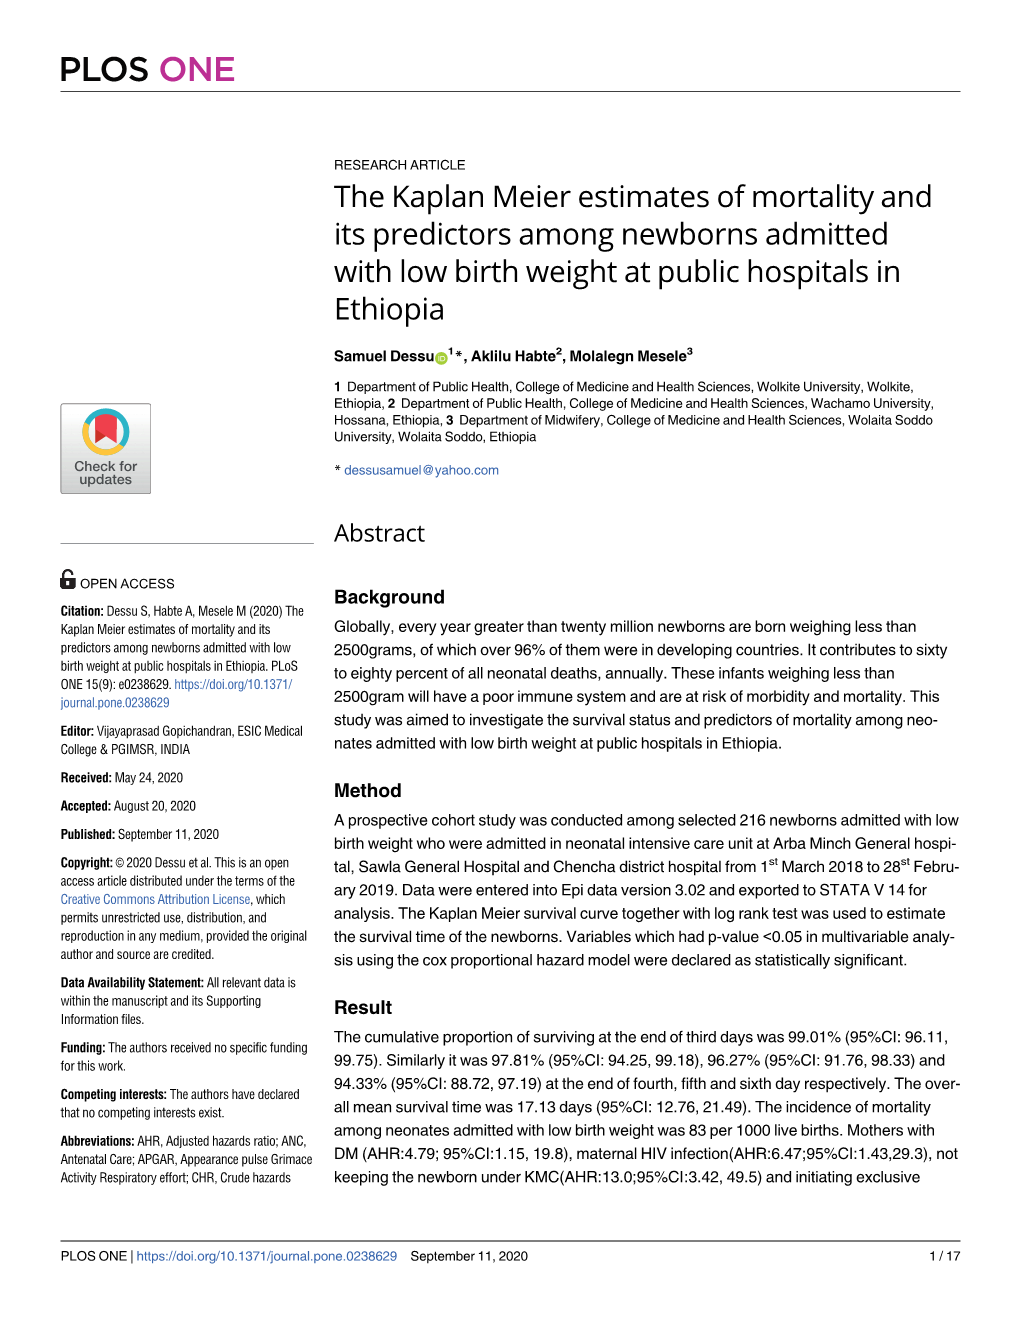 The Kaplan Meier Estimates of Mortality and Its Predictors Among Newborns Admitted with Low Birth Weight at Public Hospitals in Ethiopia